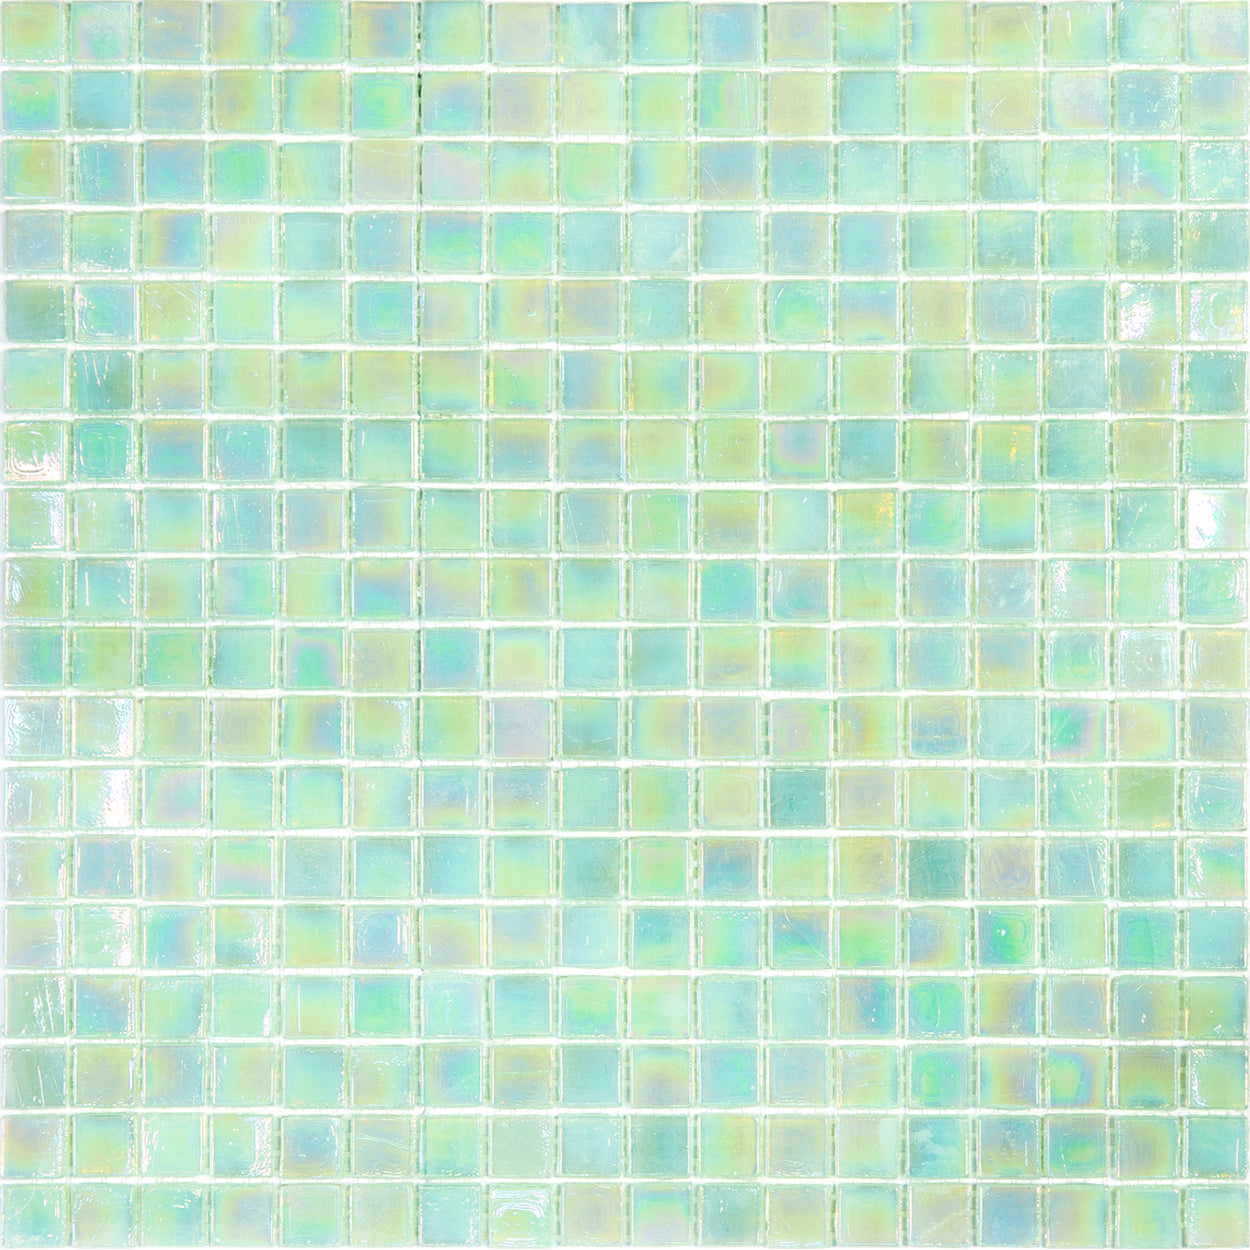 mir alma solid colors 0_6 inch nibble ne28 wall and floor mosaic distributed by surface group natural materials